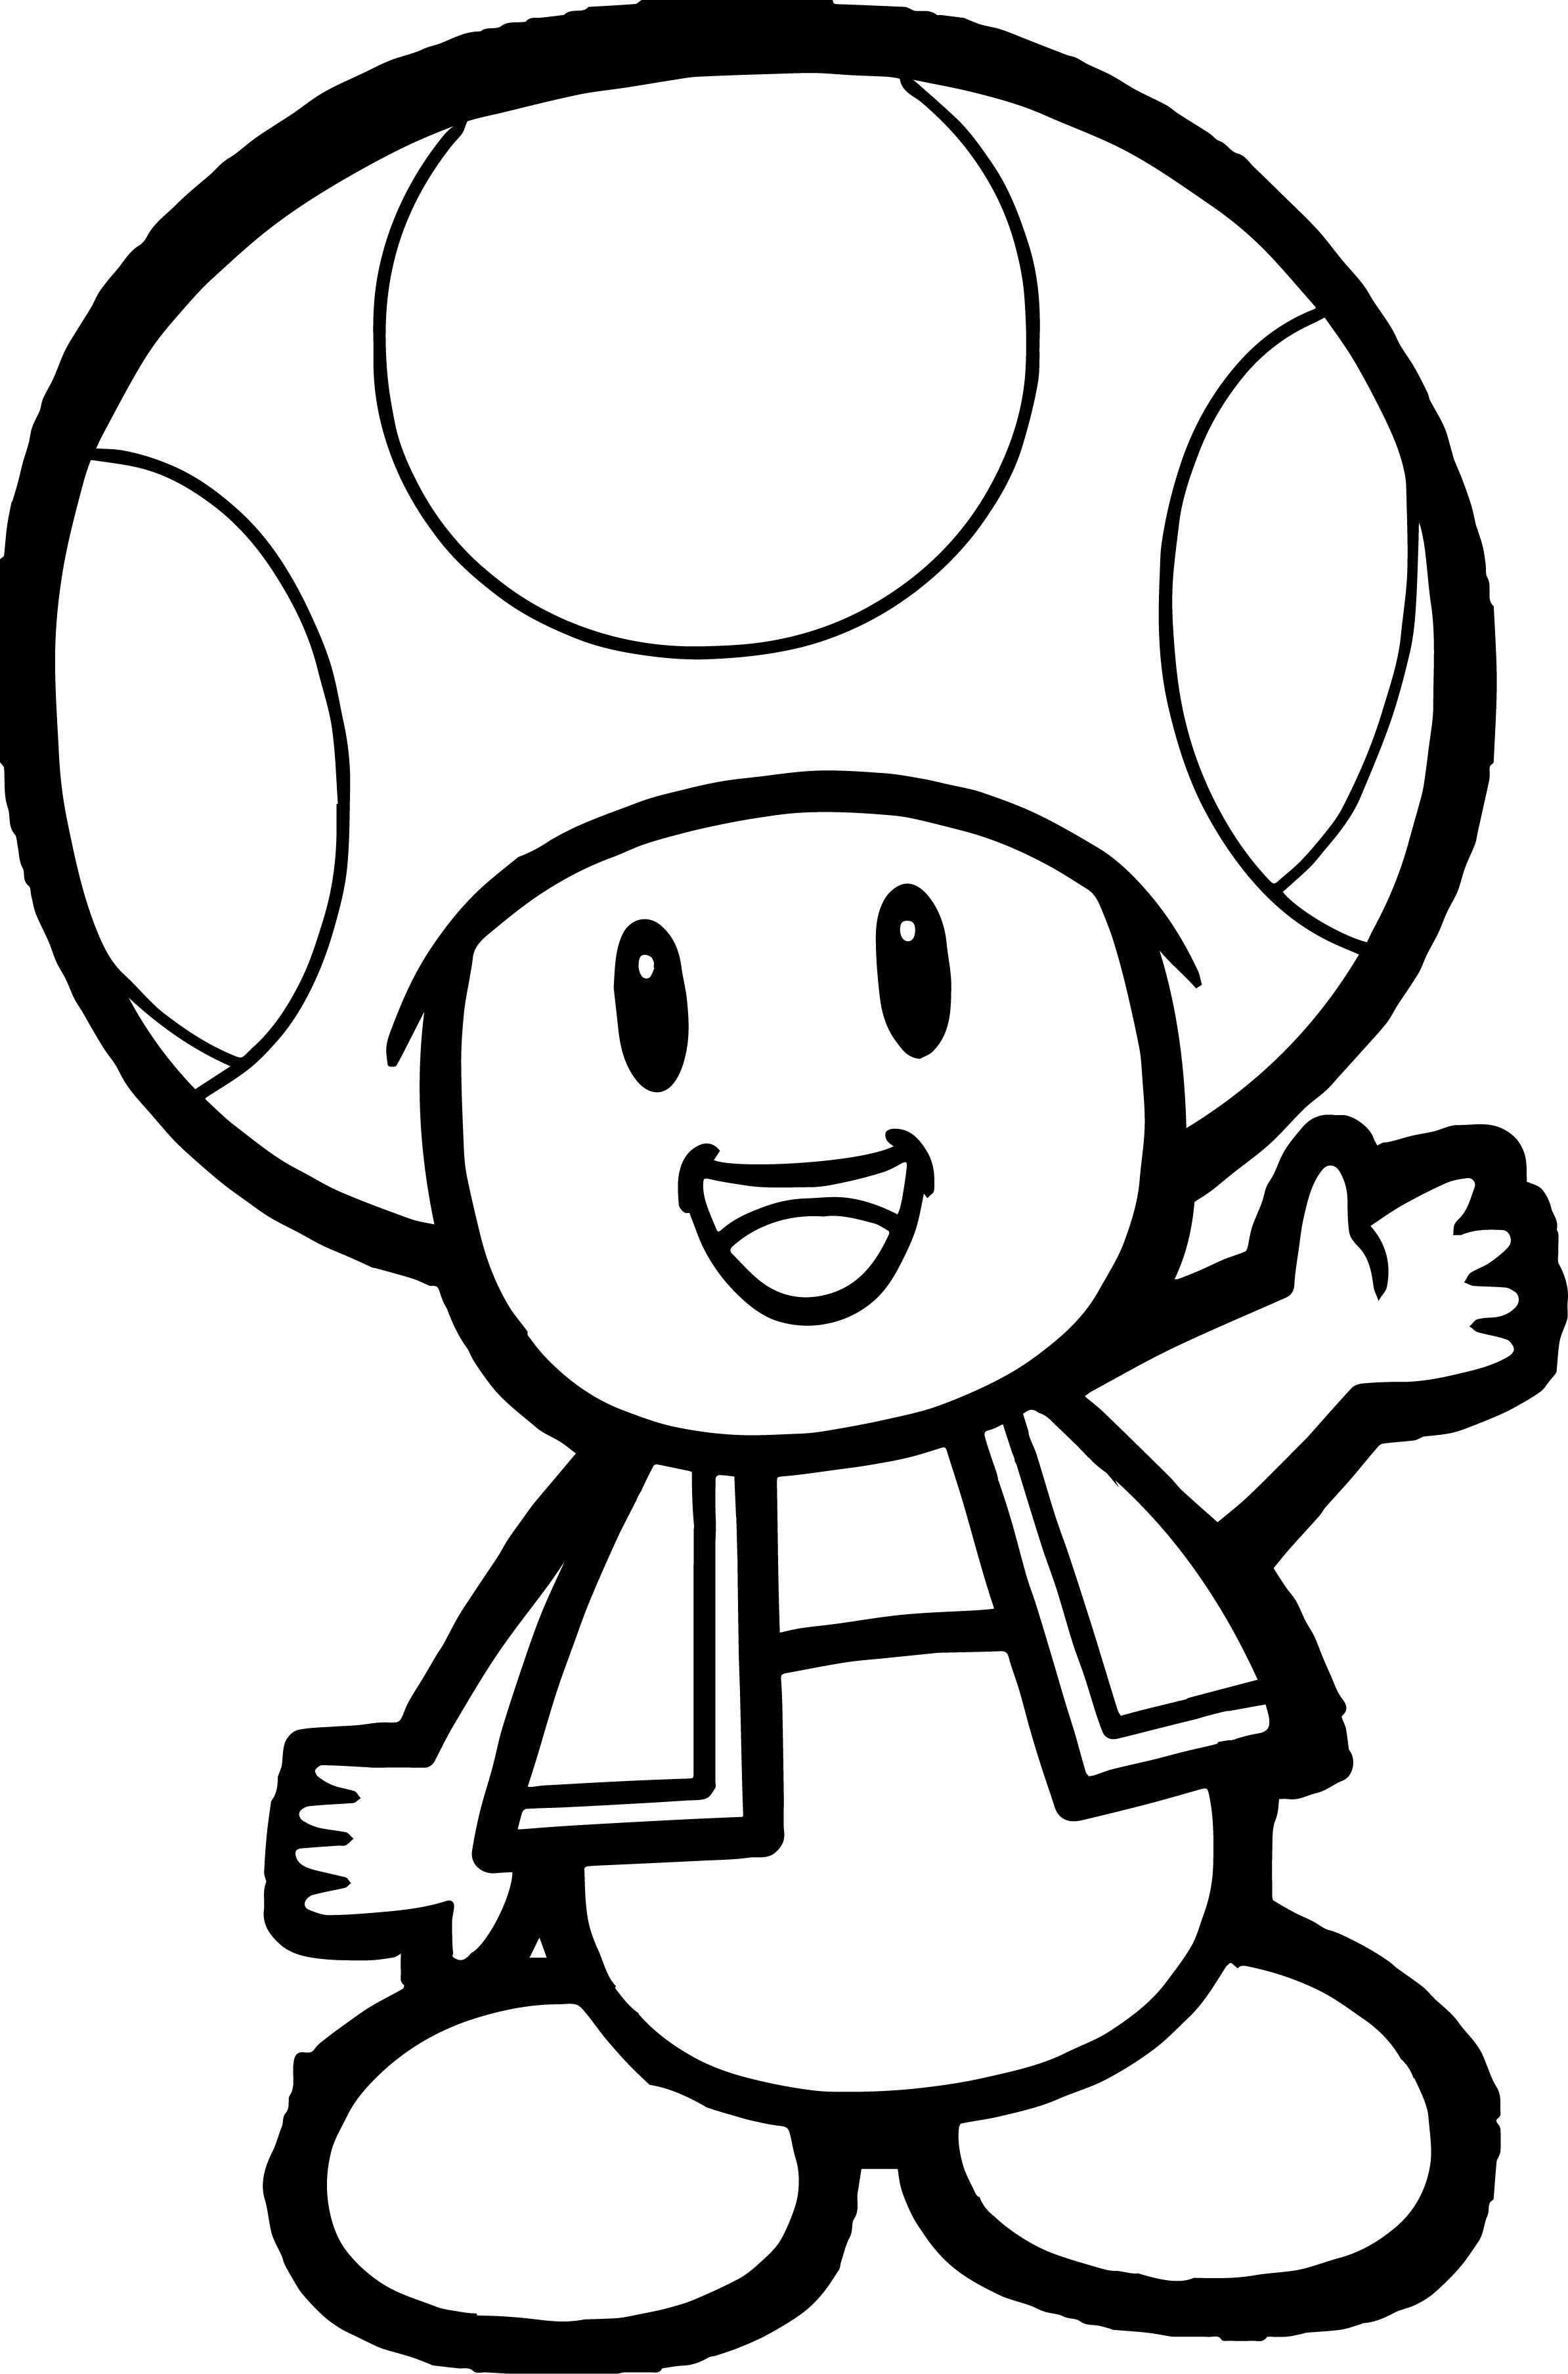 Super Mario Coloring Pages Beautiful Nice Super Mario Mushroom Coloring Page Super Ma